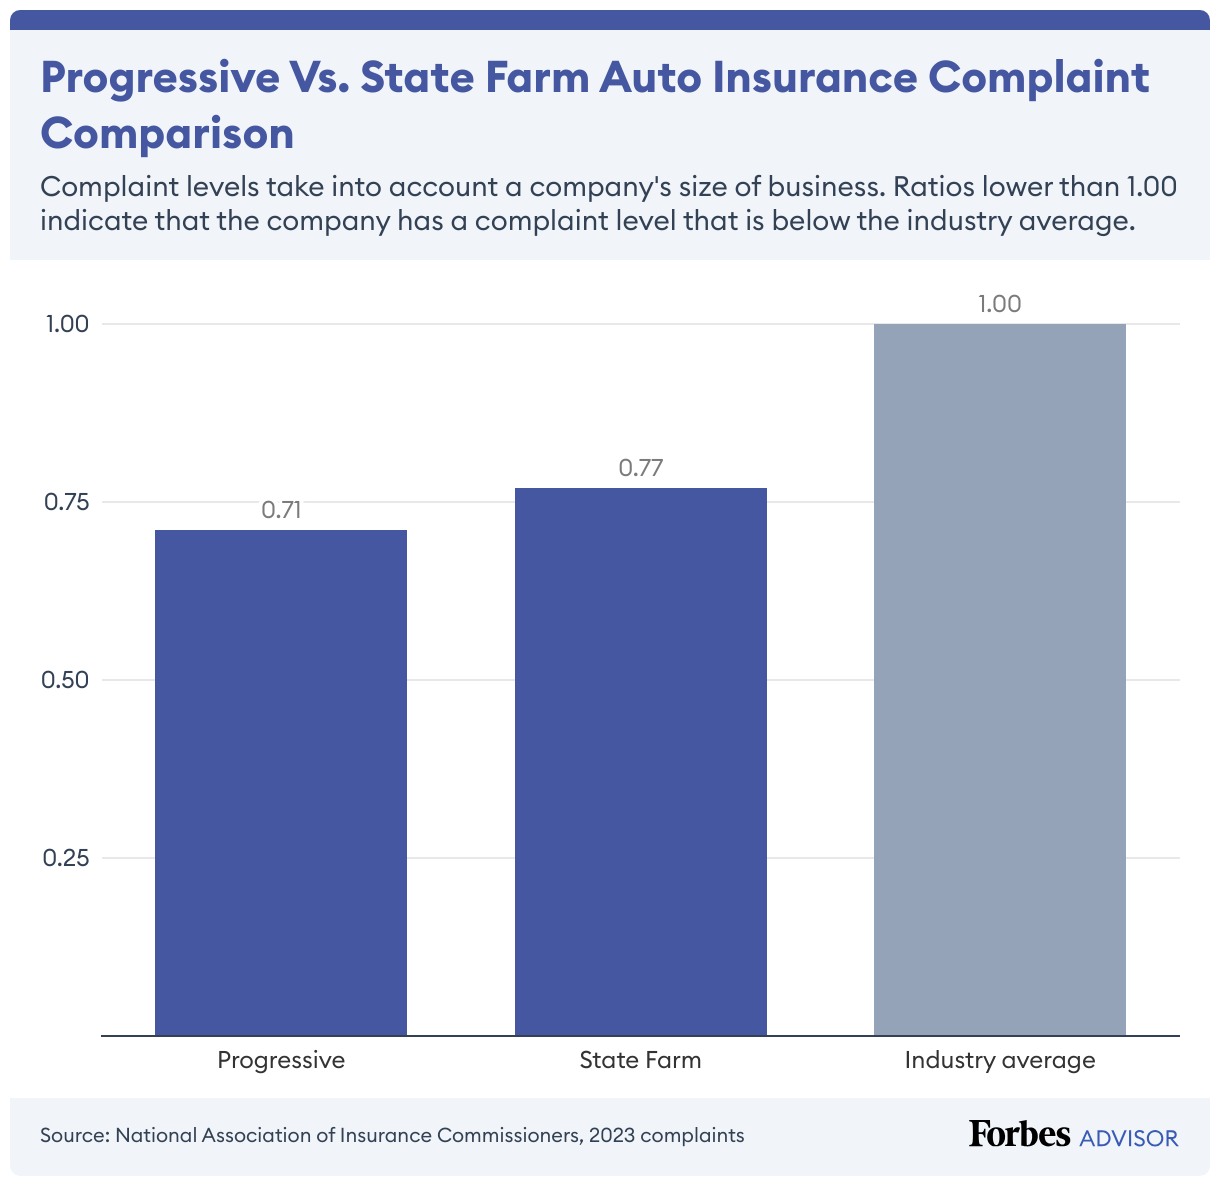 State Farm's complaint level is slightly higher than Progressive's but still lower than the industry average.